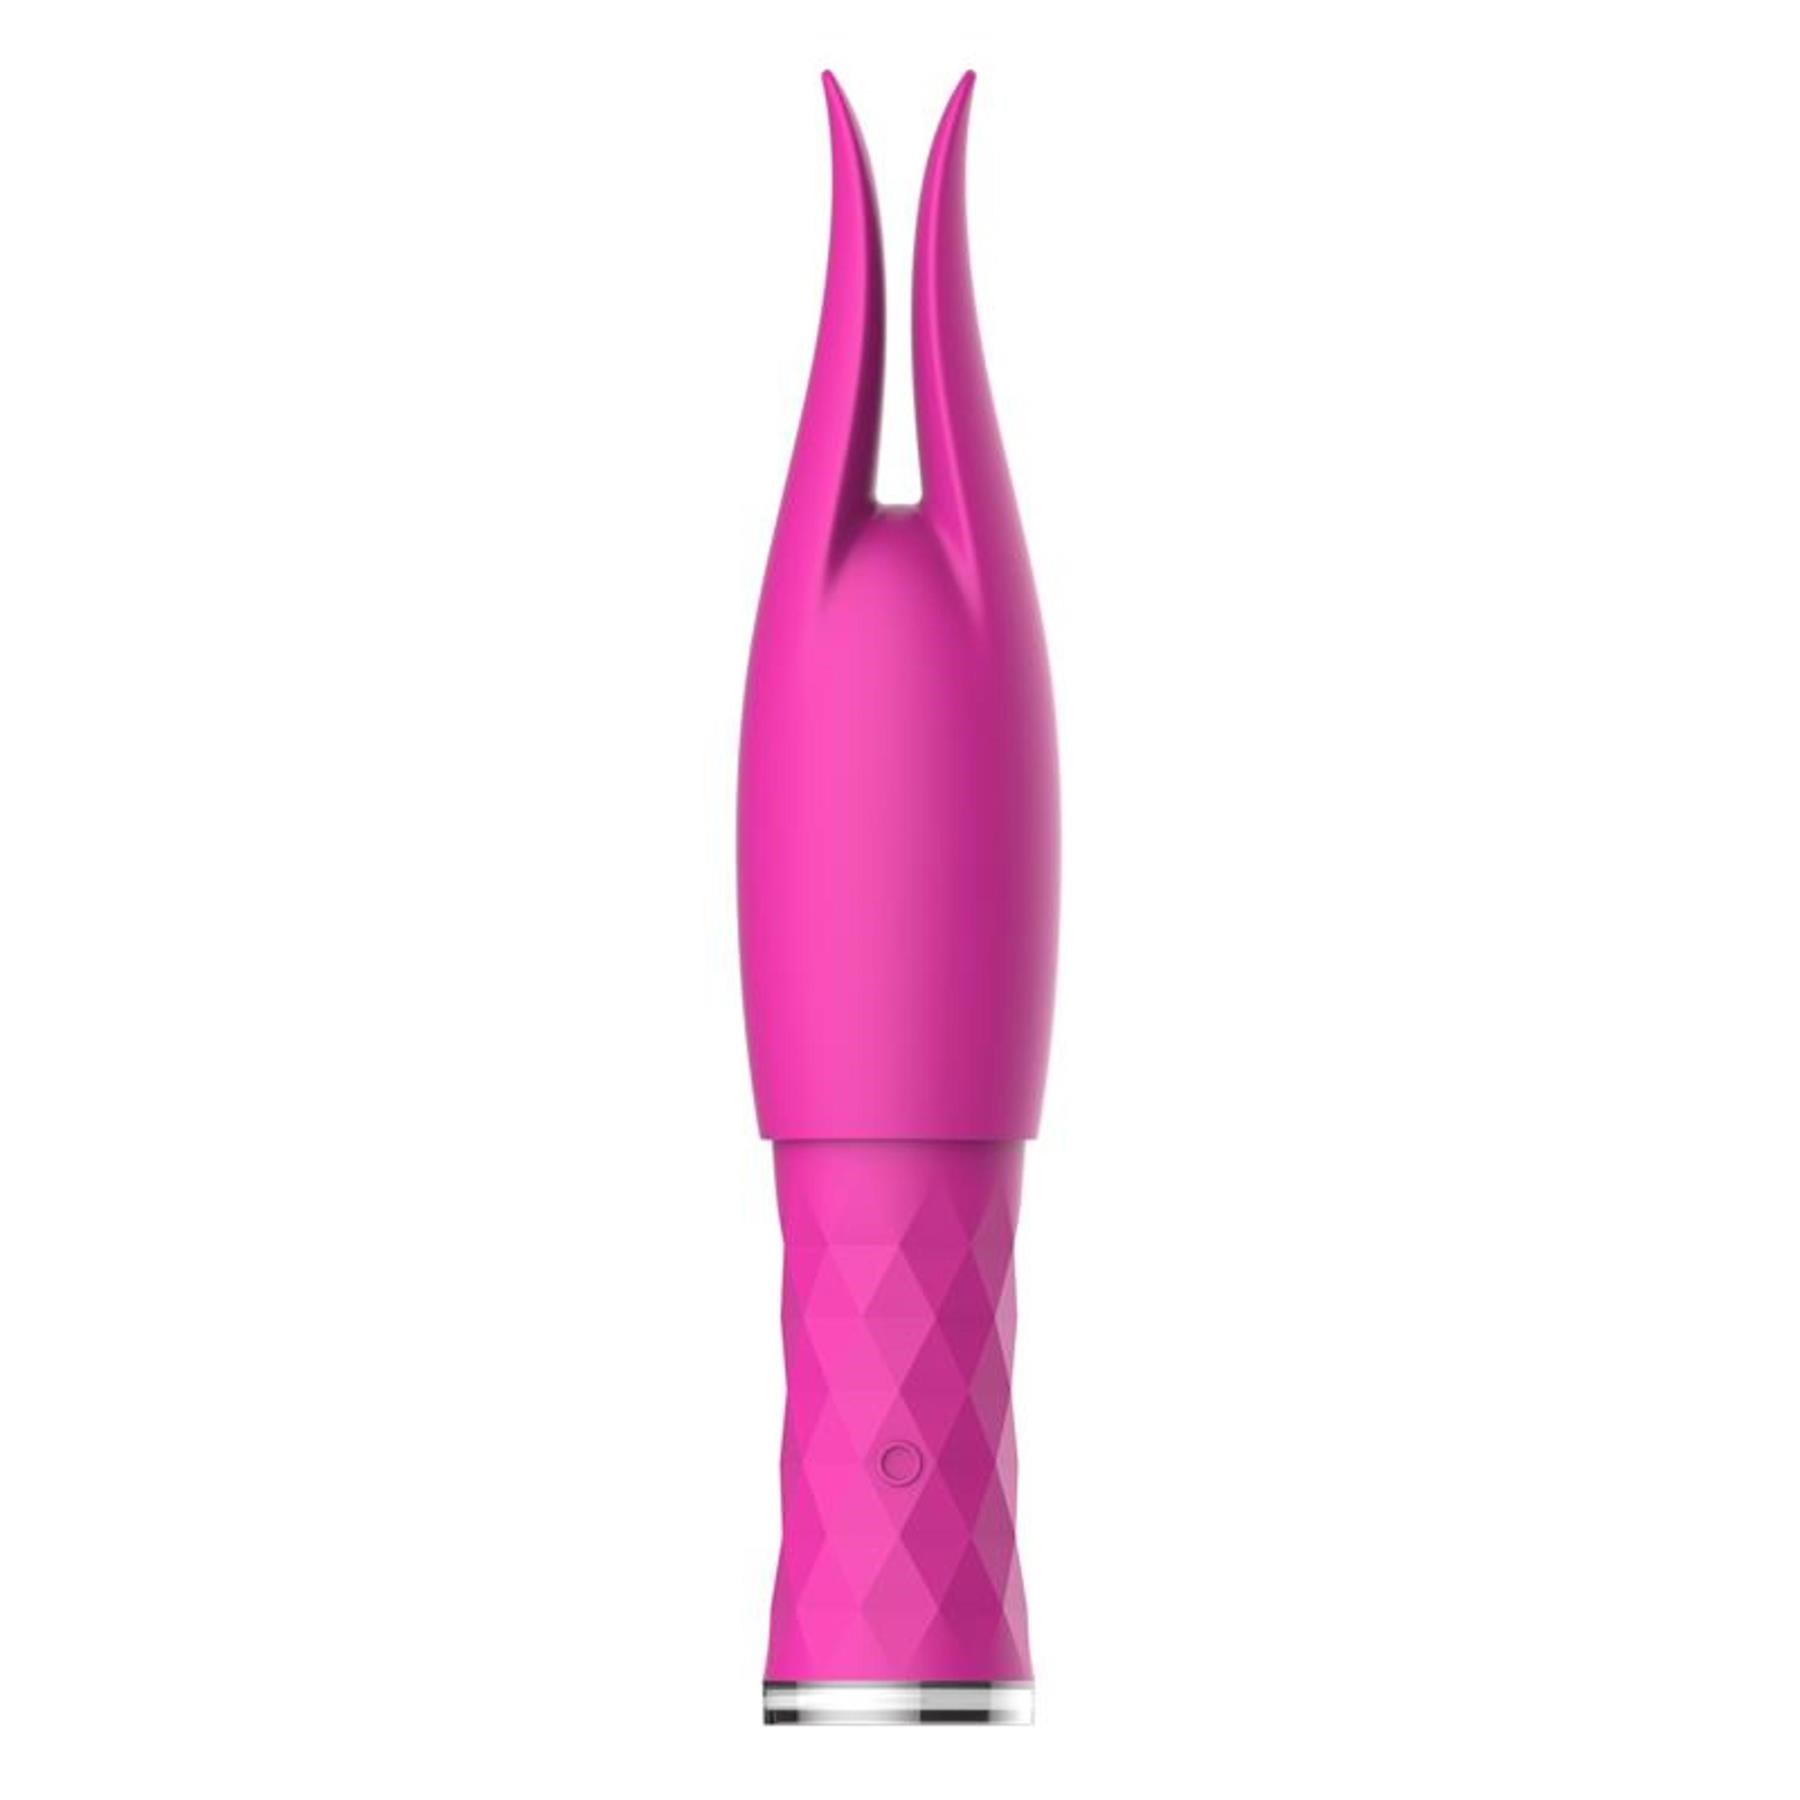 Queen V Silicone Vibrator With Wingwoman Attachment - Product Shot